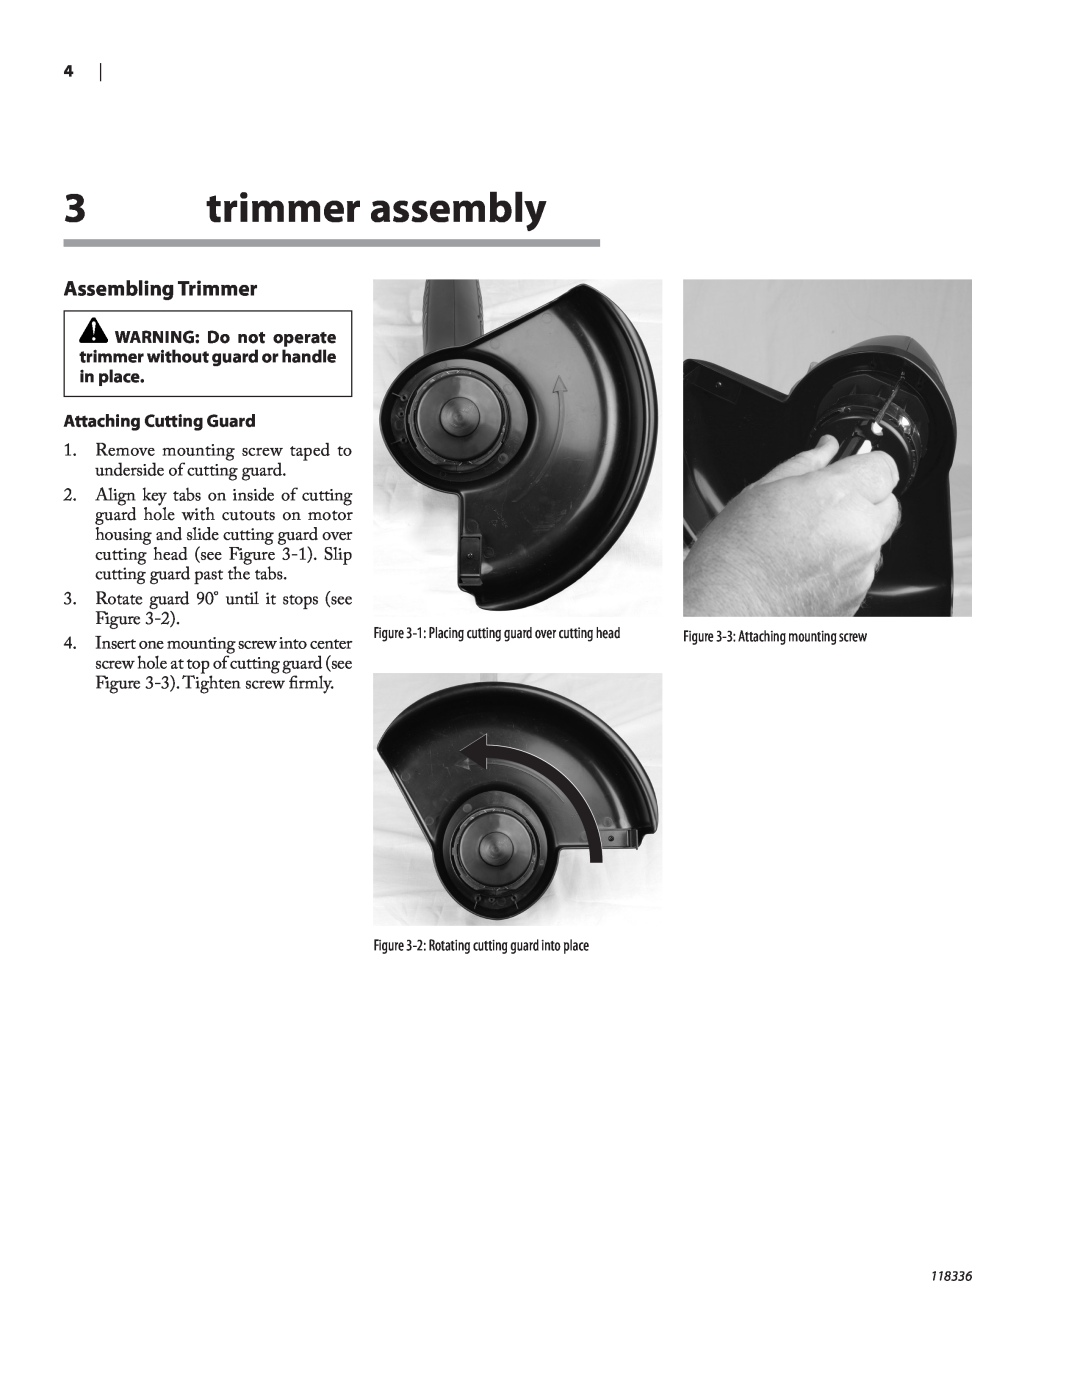 Remington Power Tools ST3010A owner manual trimmer assembly, Assembling Trimmer, Attaching Cutting Guard 